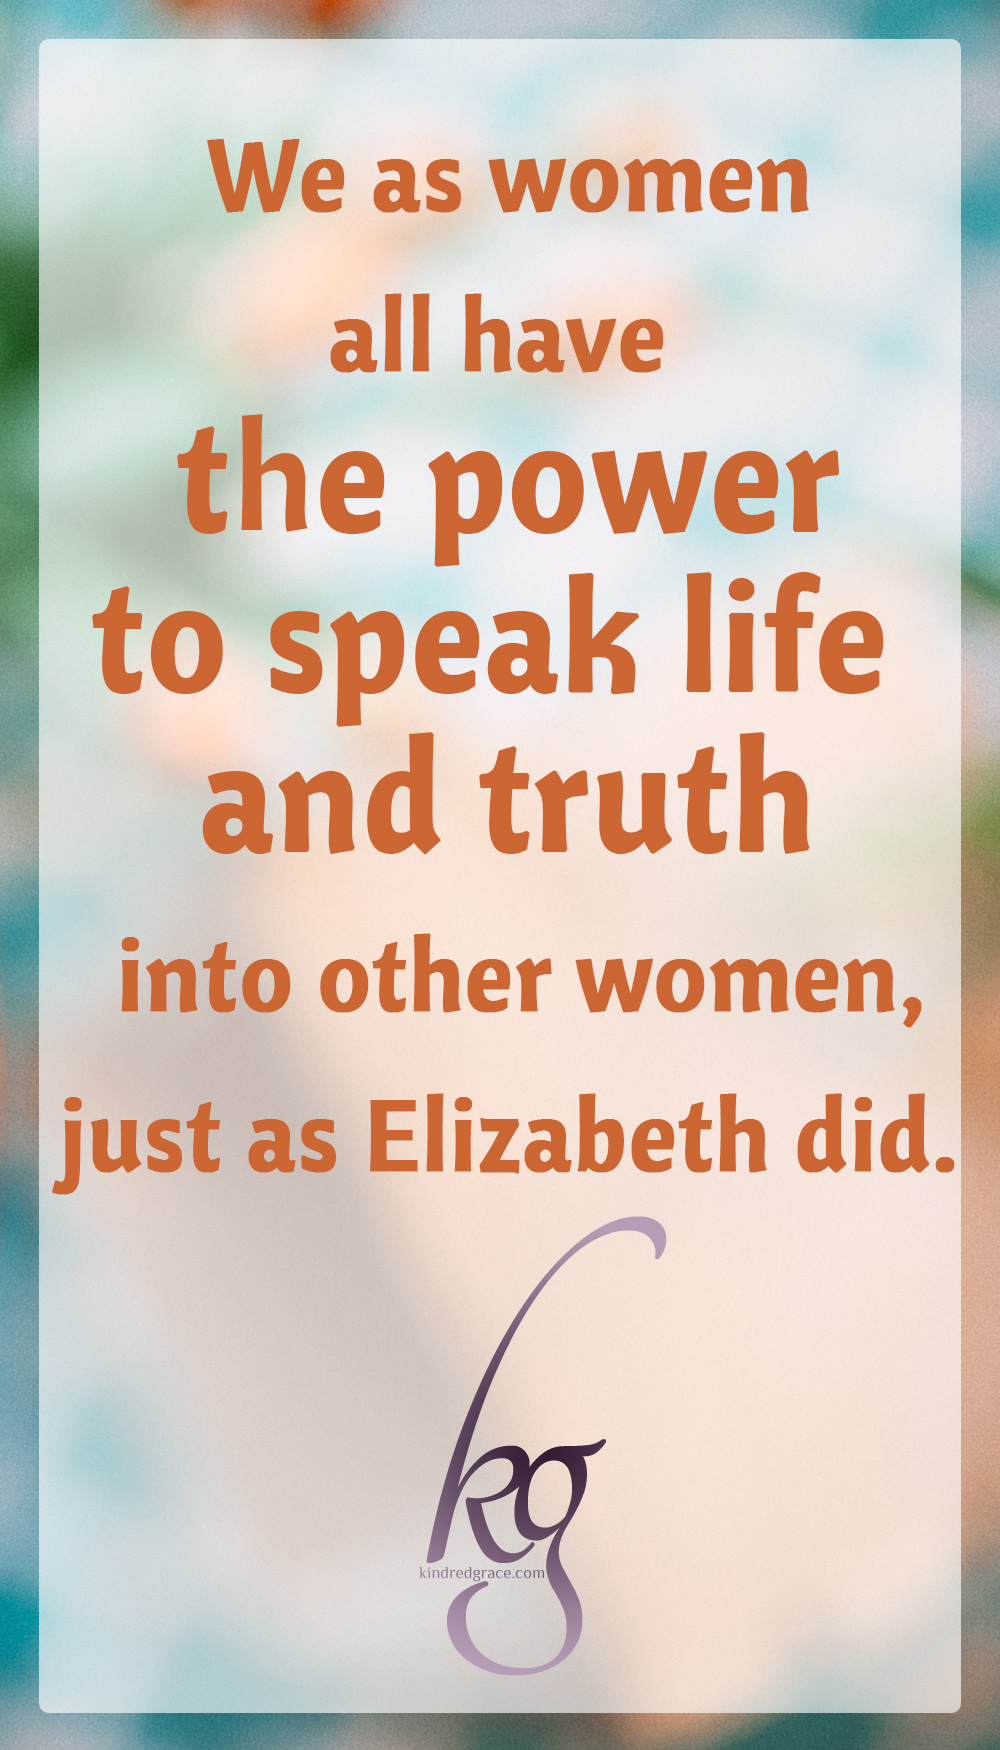 We as women all have the power to speak life and truth into other women. Who will you encourage with your words? via @KindredGrace